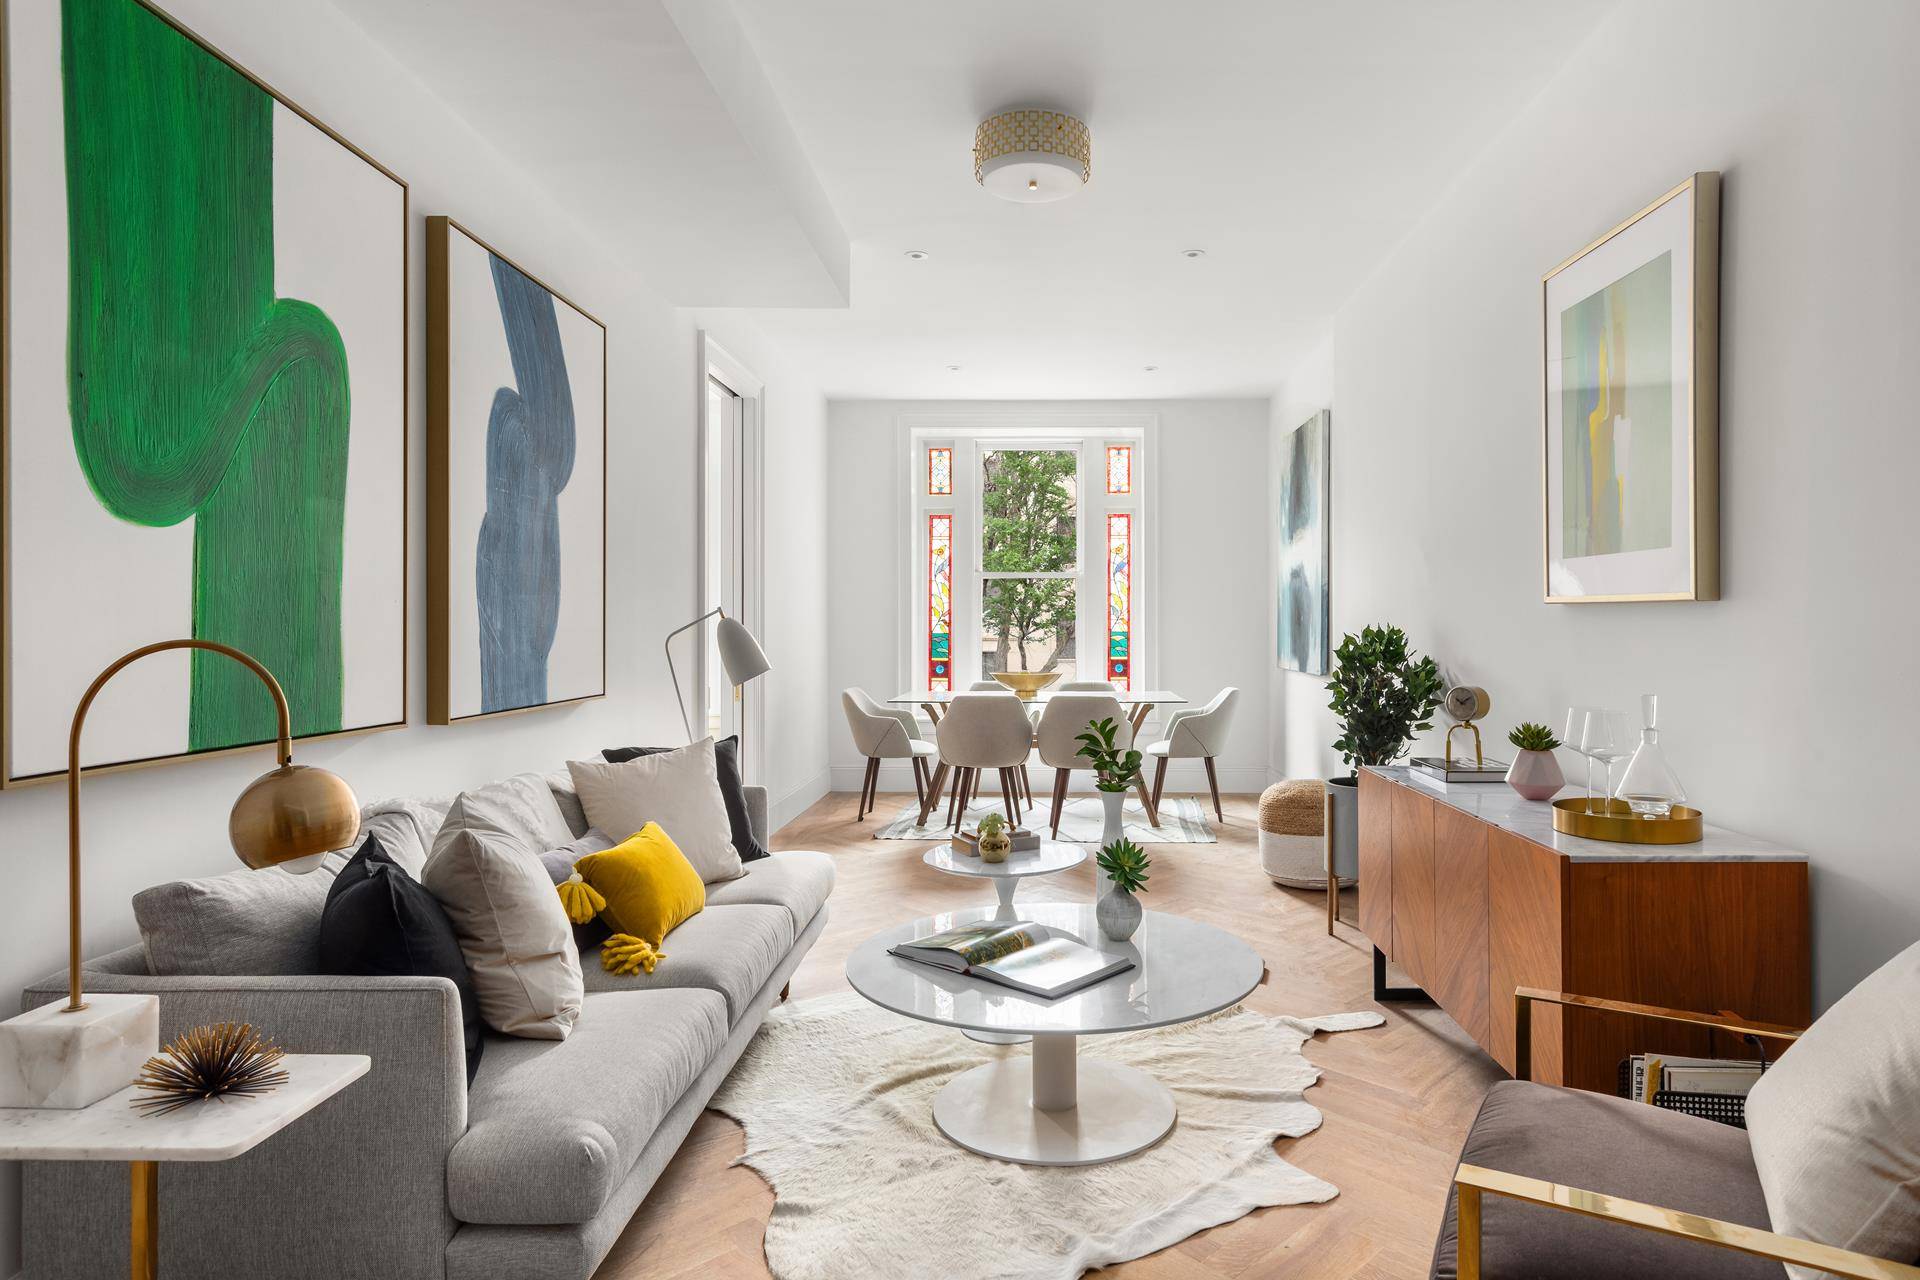 Welcome home to the Twine on Park, an exemplary new boutique condominium on one of brownstone Brooklyn's most beautiful and conveniently located blocks.